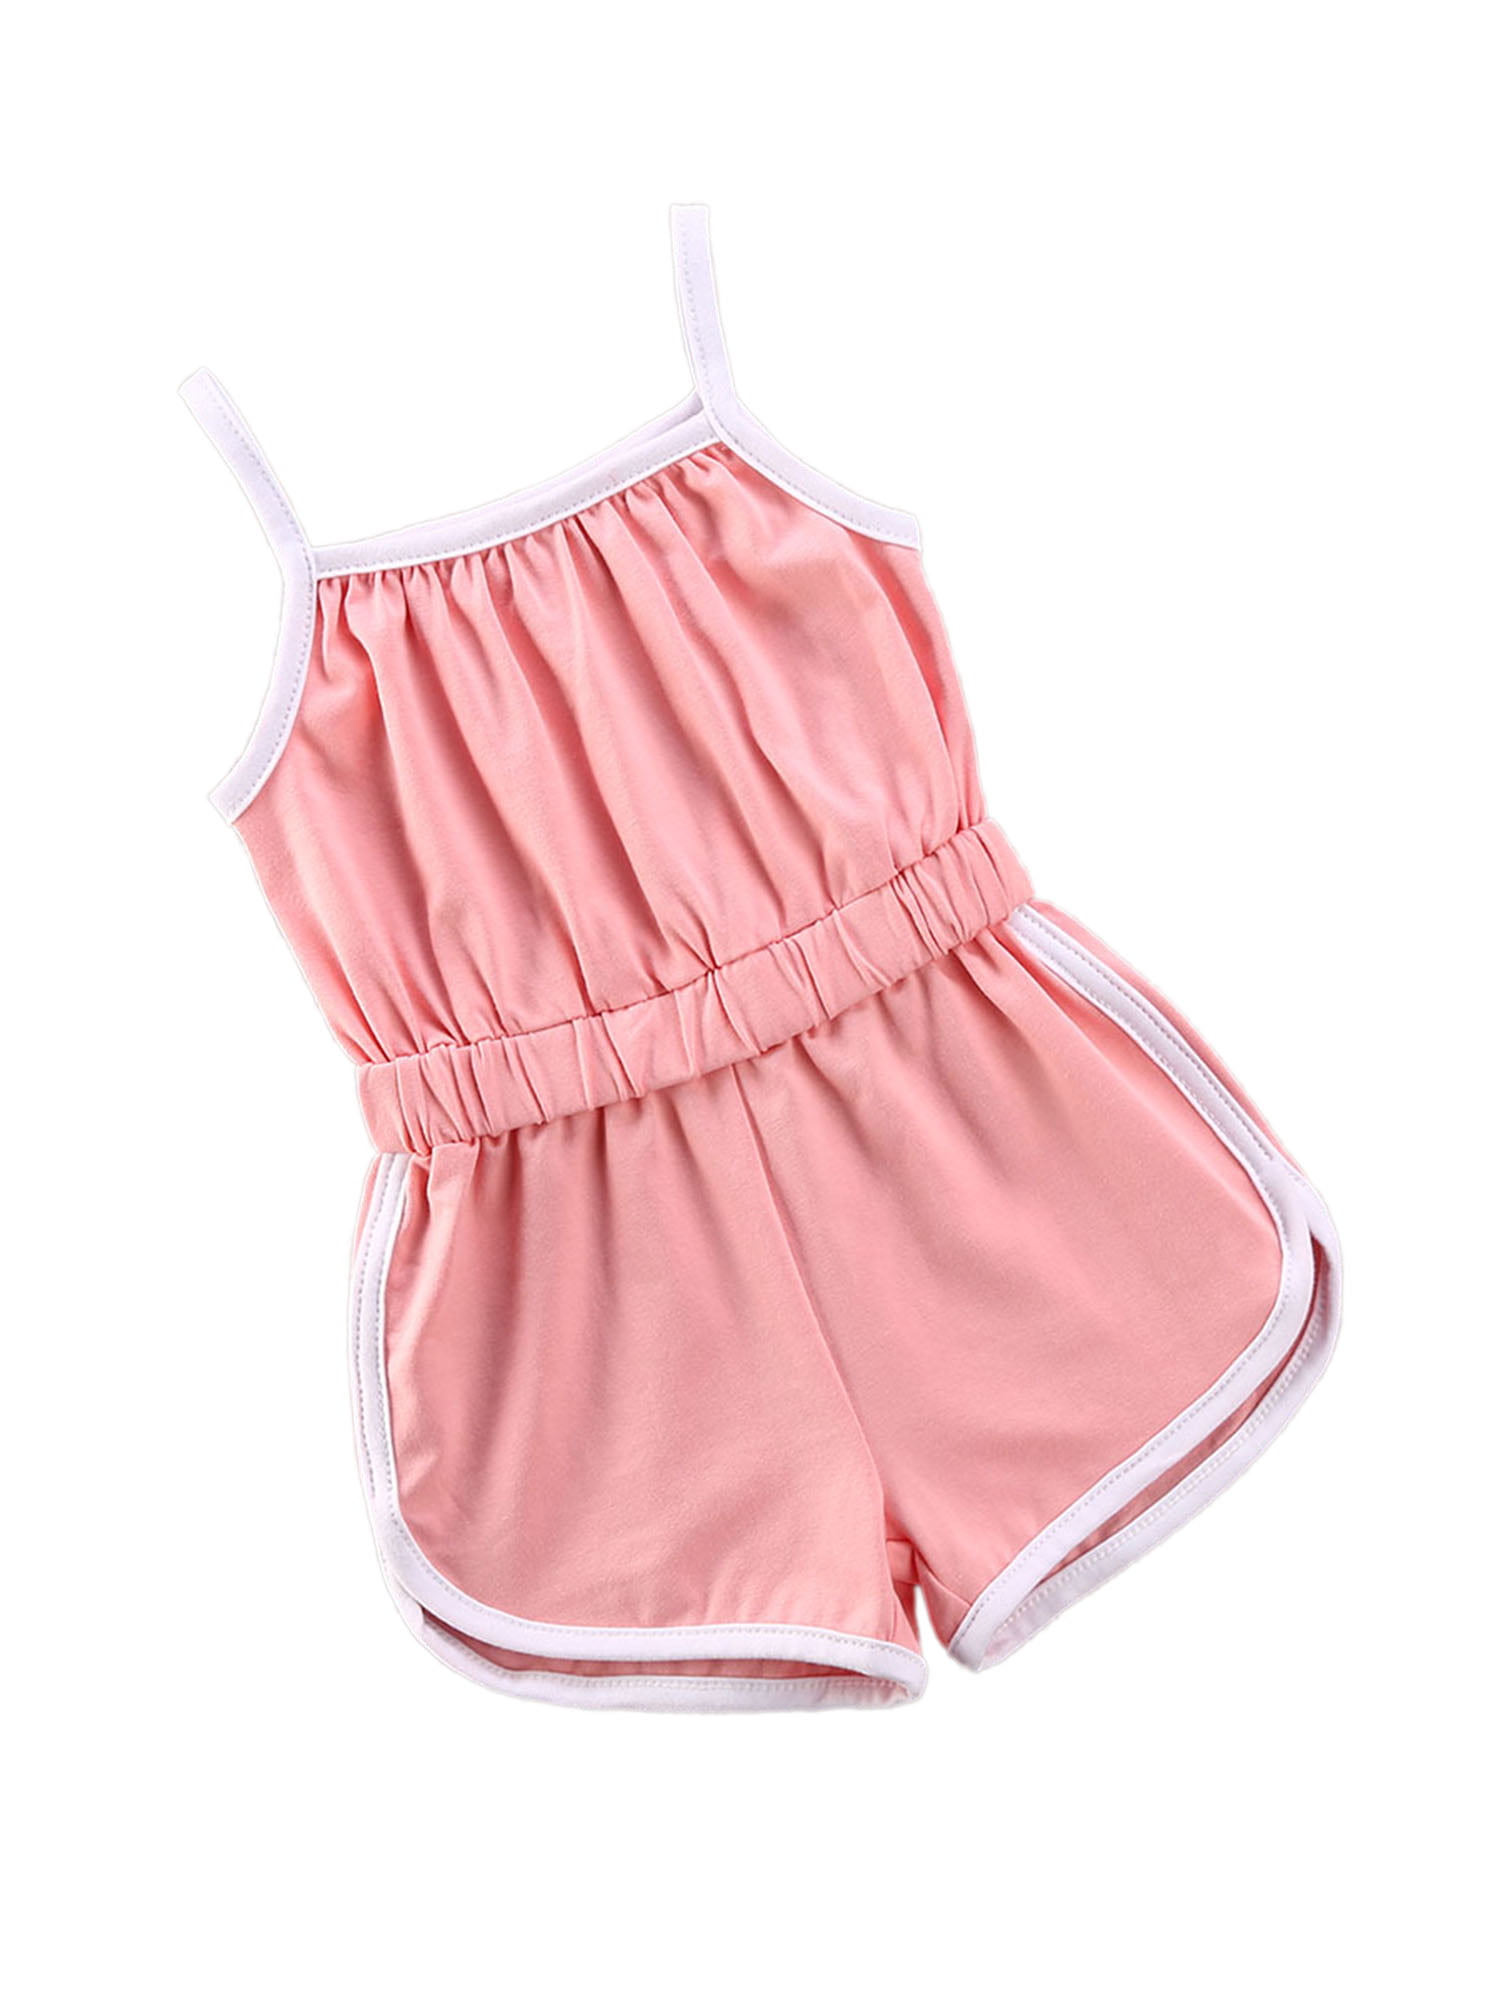 Lace Toddler Baby Girl Strap One-piece Romper Jumper Jumpsuit Summer Clothes 